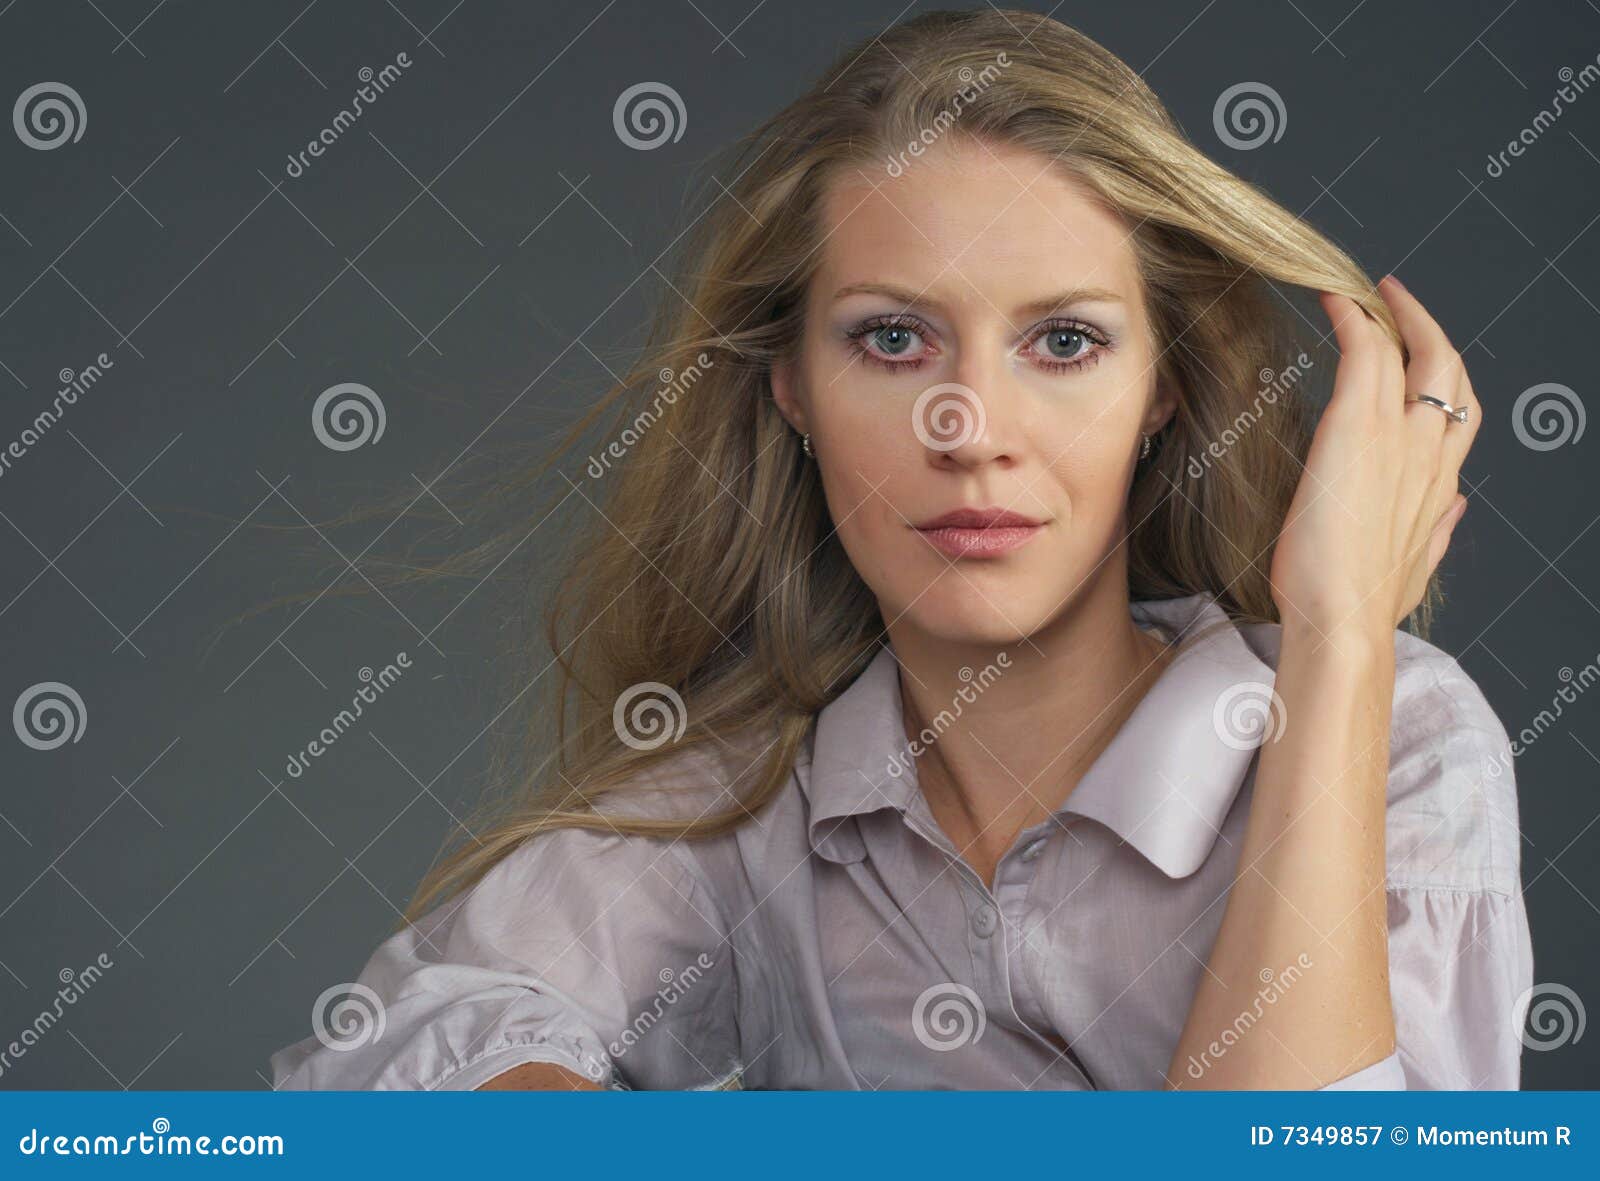 Blonde girl with wavy hair waving at the camera - wide 7